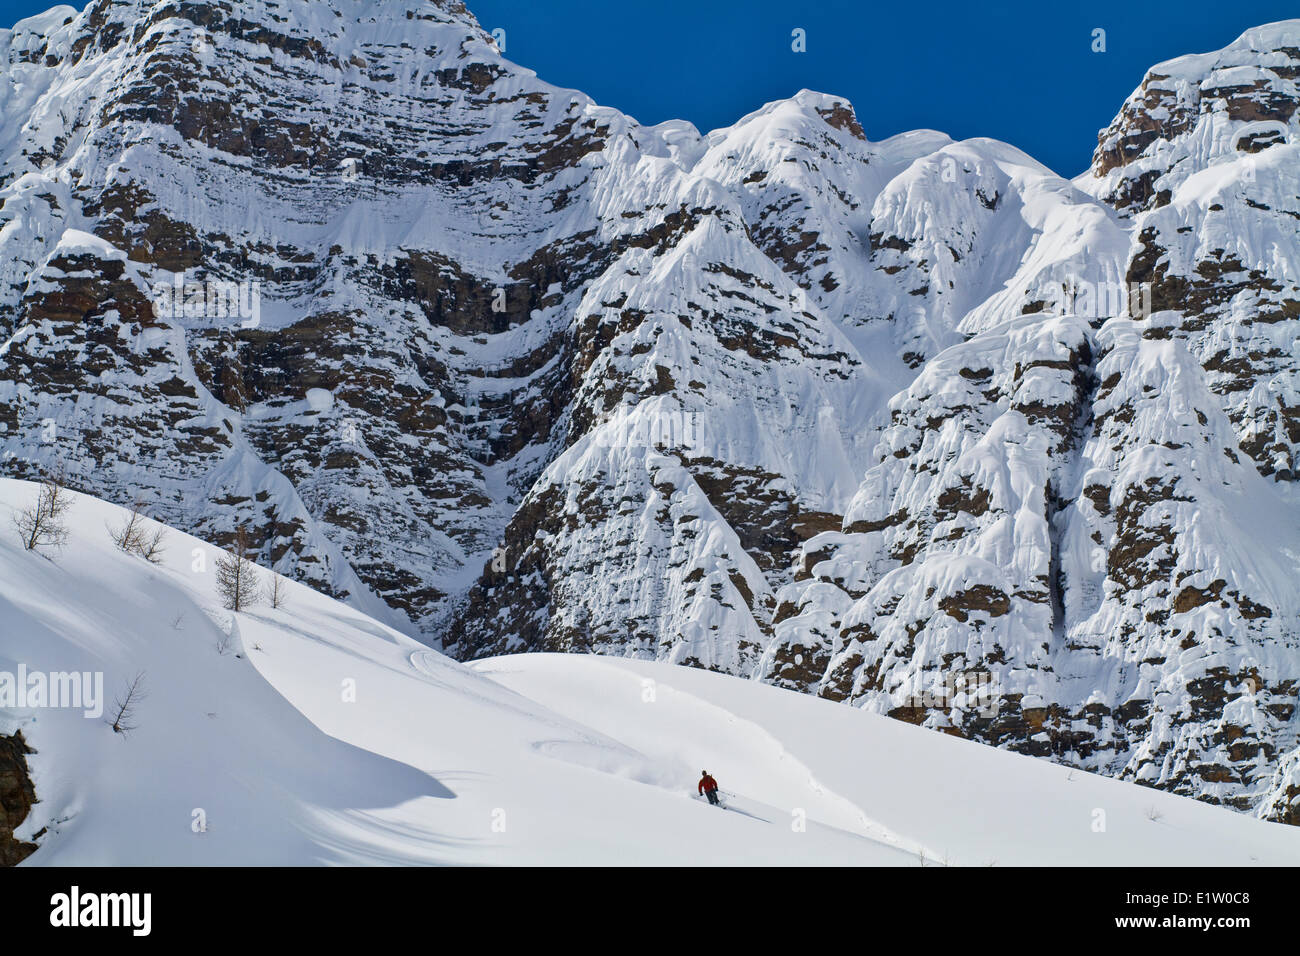 A male backcountry skier on tele skis find deep powder on a bluebird day. Mt. Bell, Banff National Park, AB Stock Photo